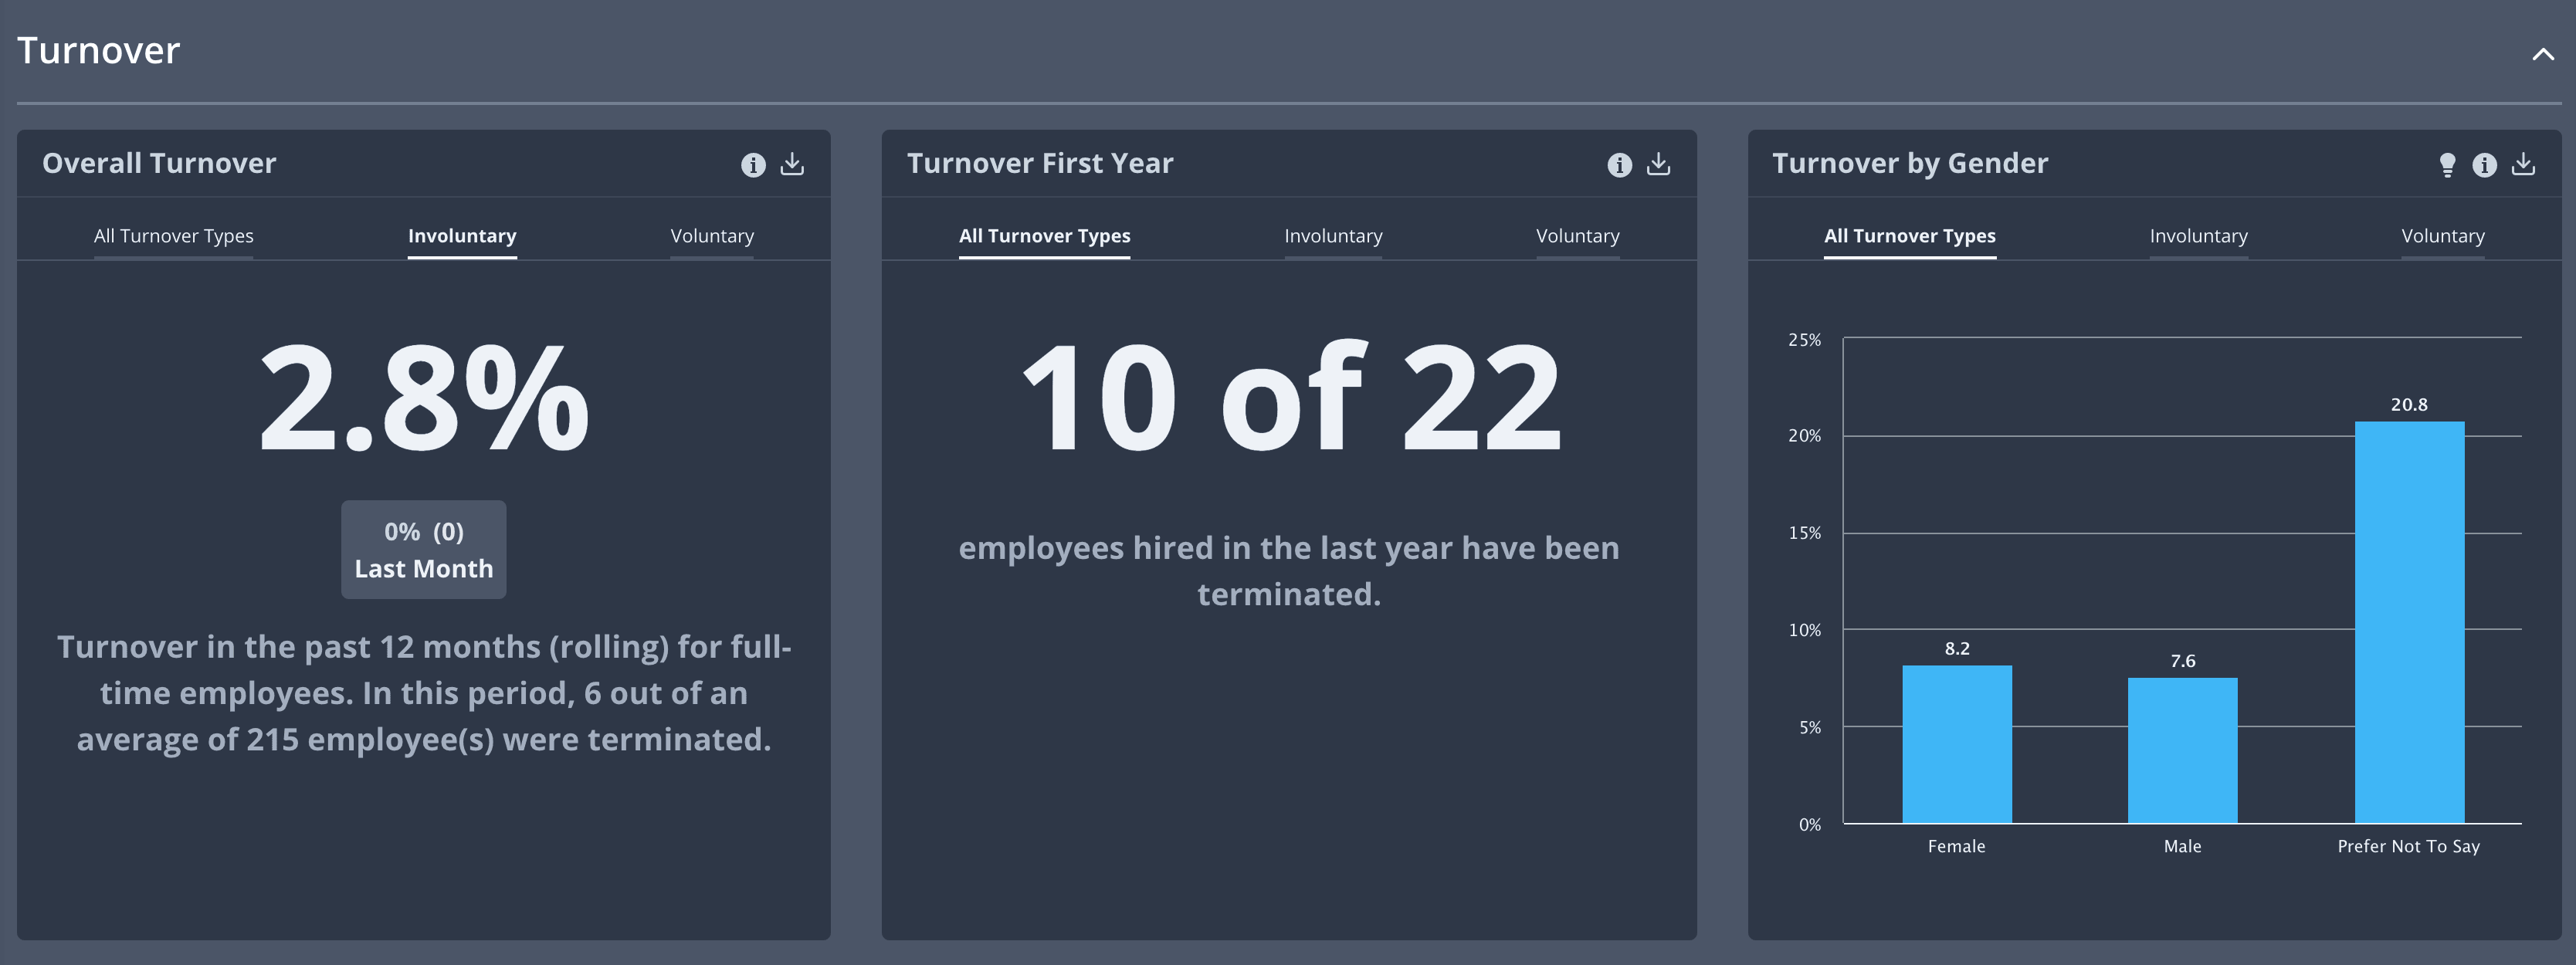 Turnover type with Employee Cycle